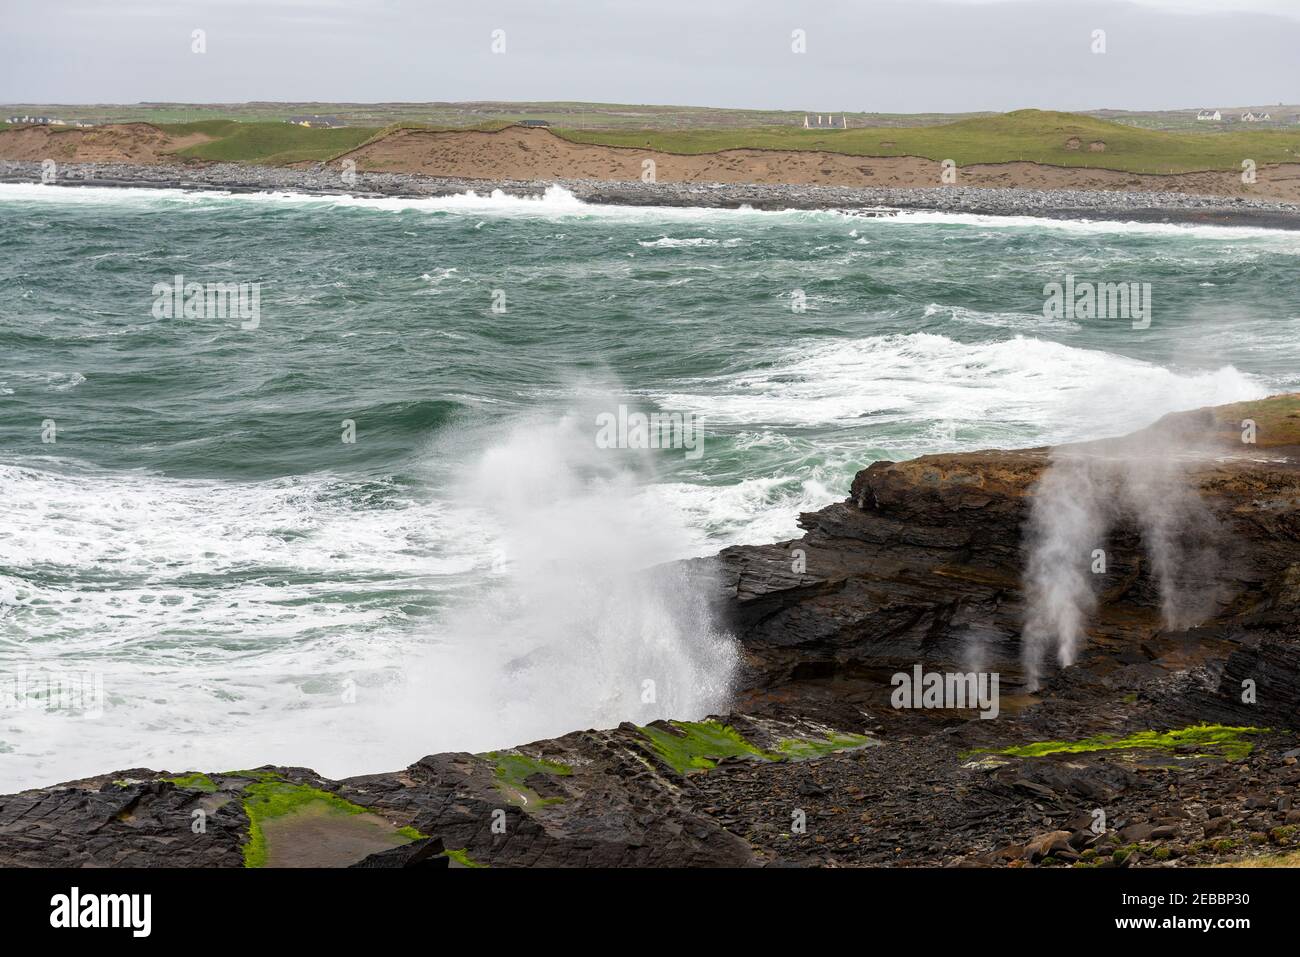 Rough sea and choppy water at the Cliffs of Moher view of the sandstone and siltstone shore towards Doolin and Galway Bay in County Clare, Ireland Stock Photo